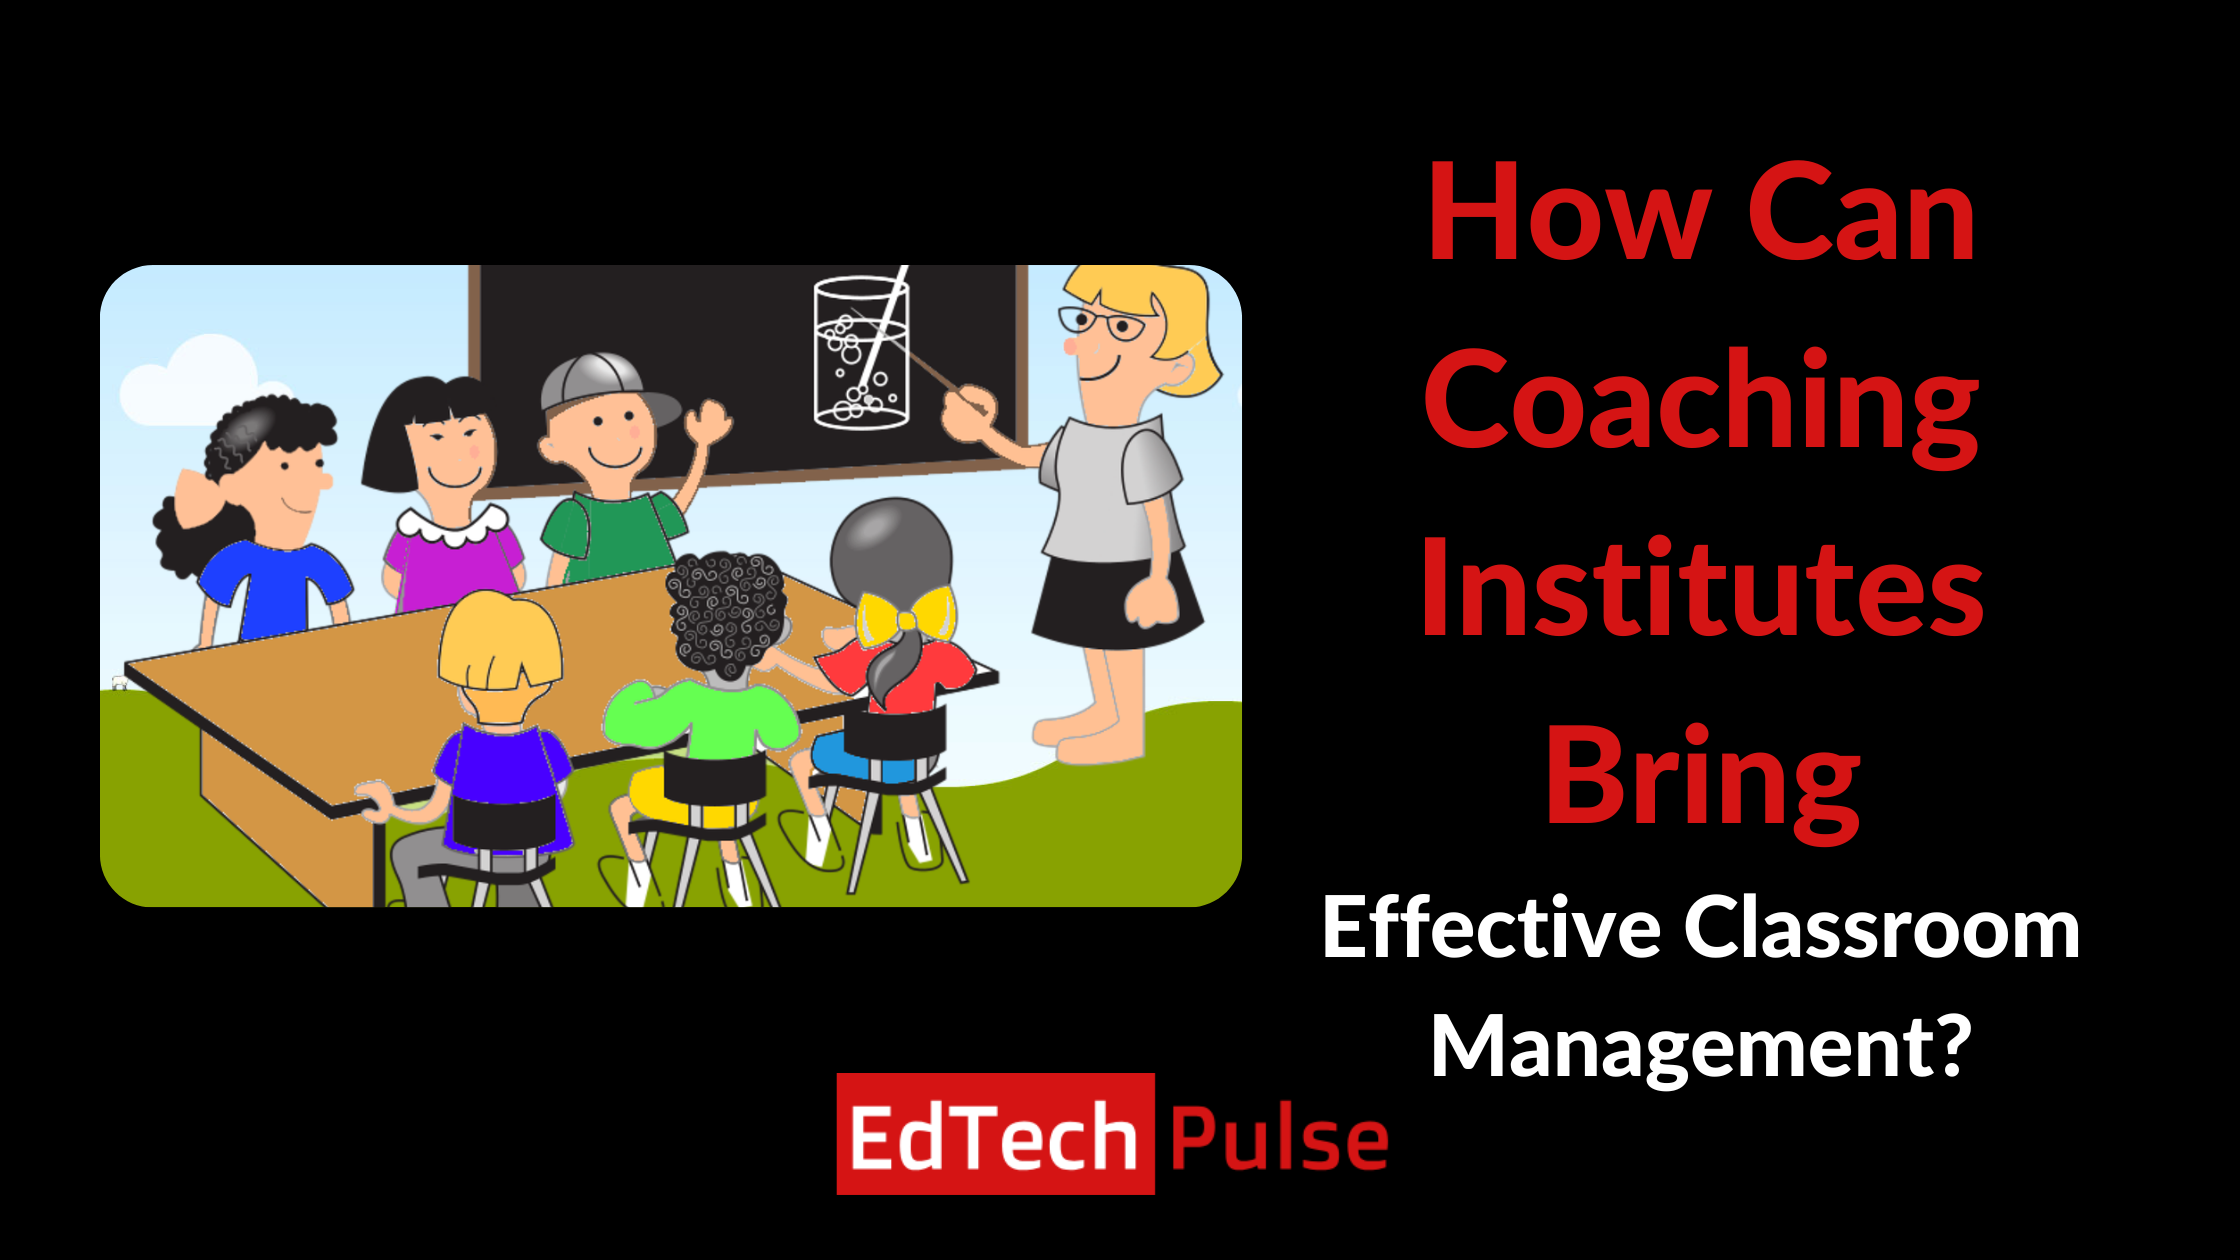 How Can Coaching Institutes Bring Effective Classroom Management?